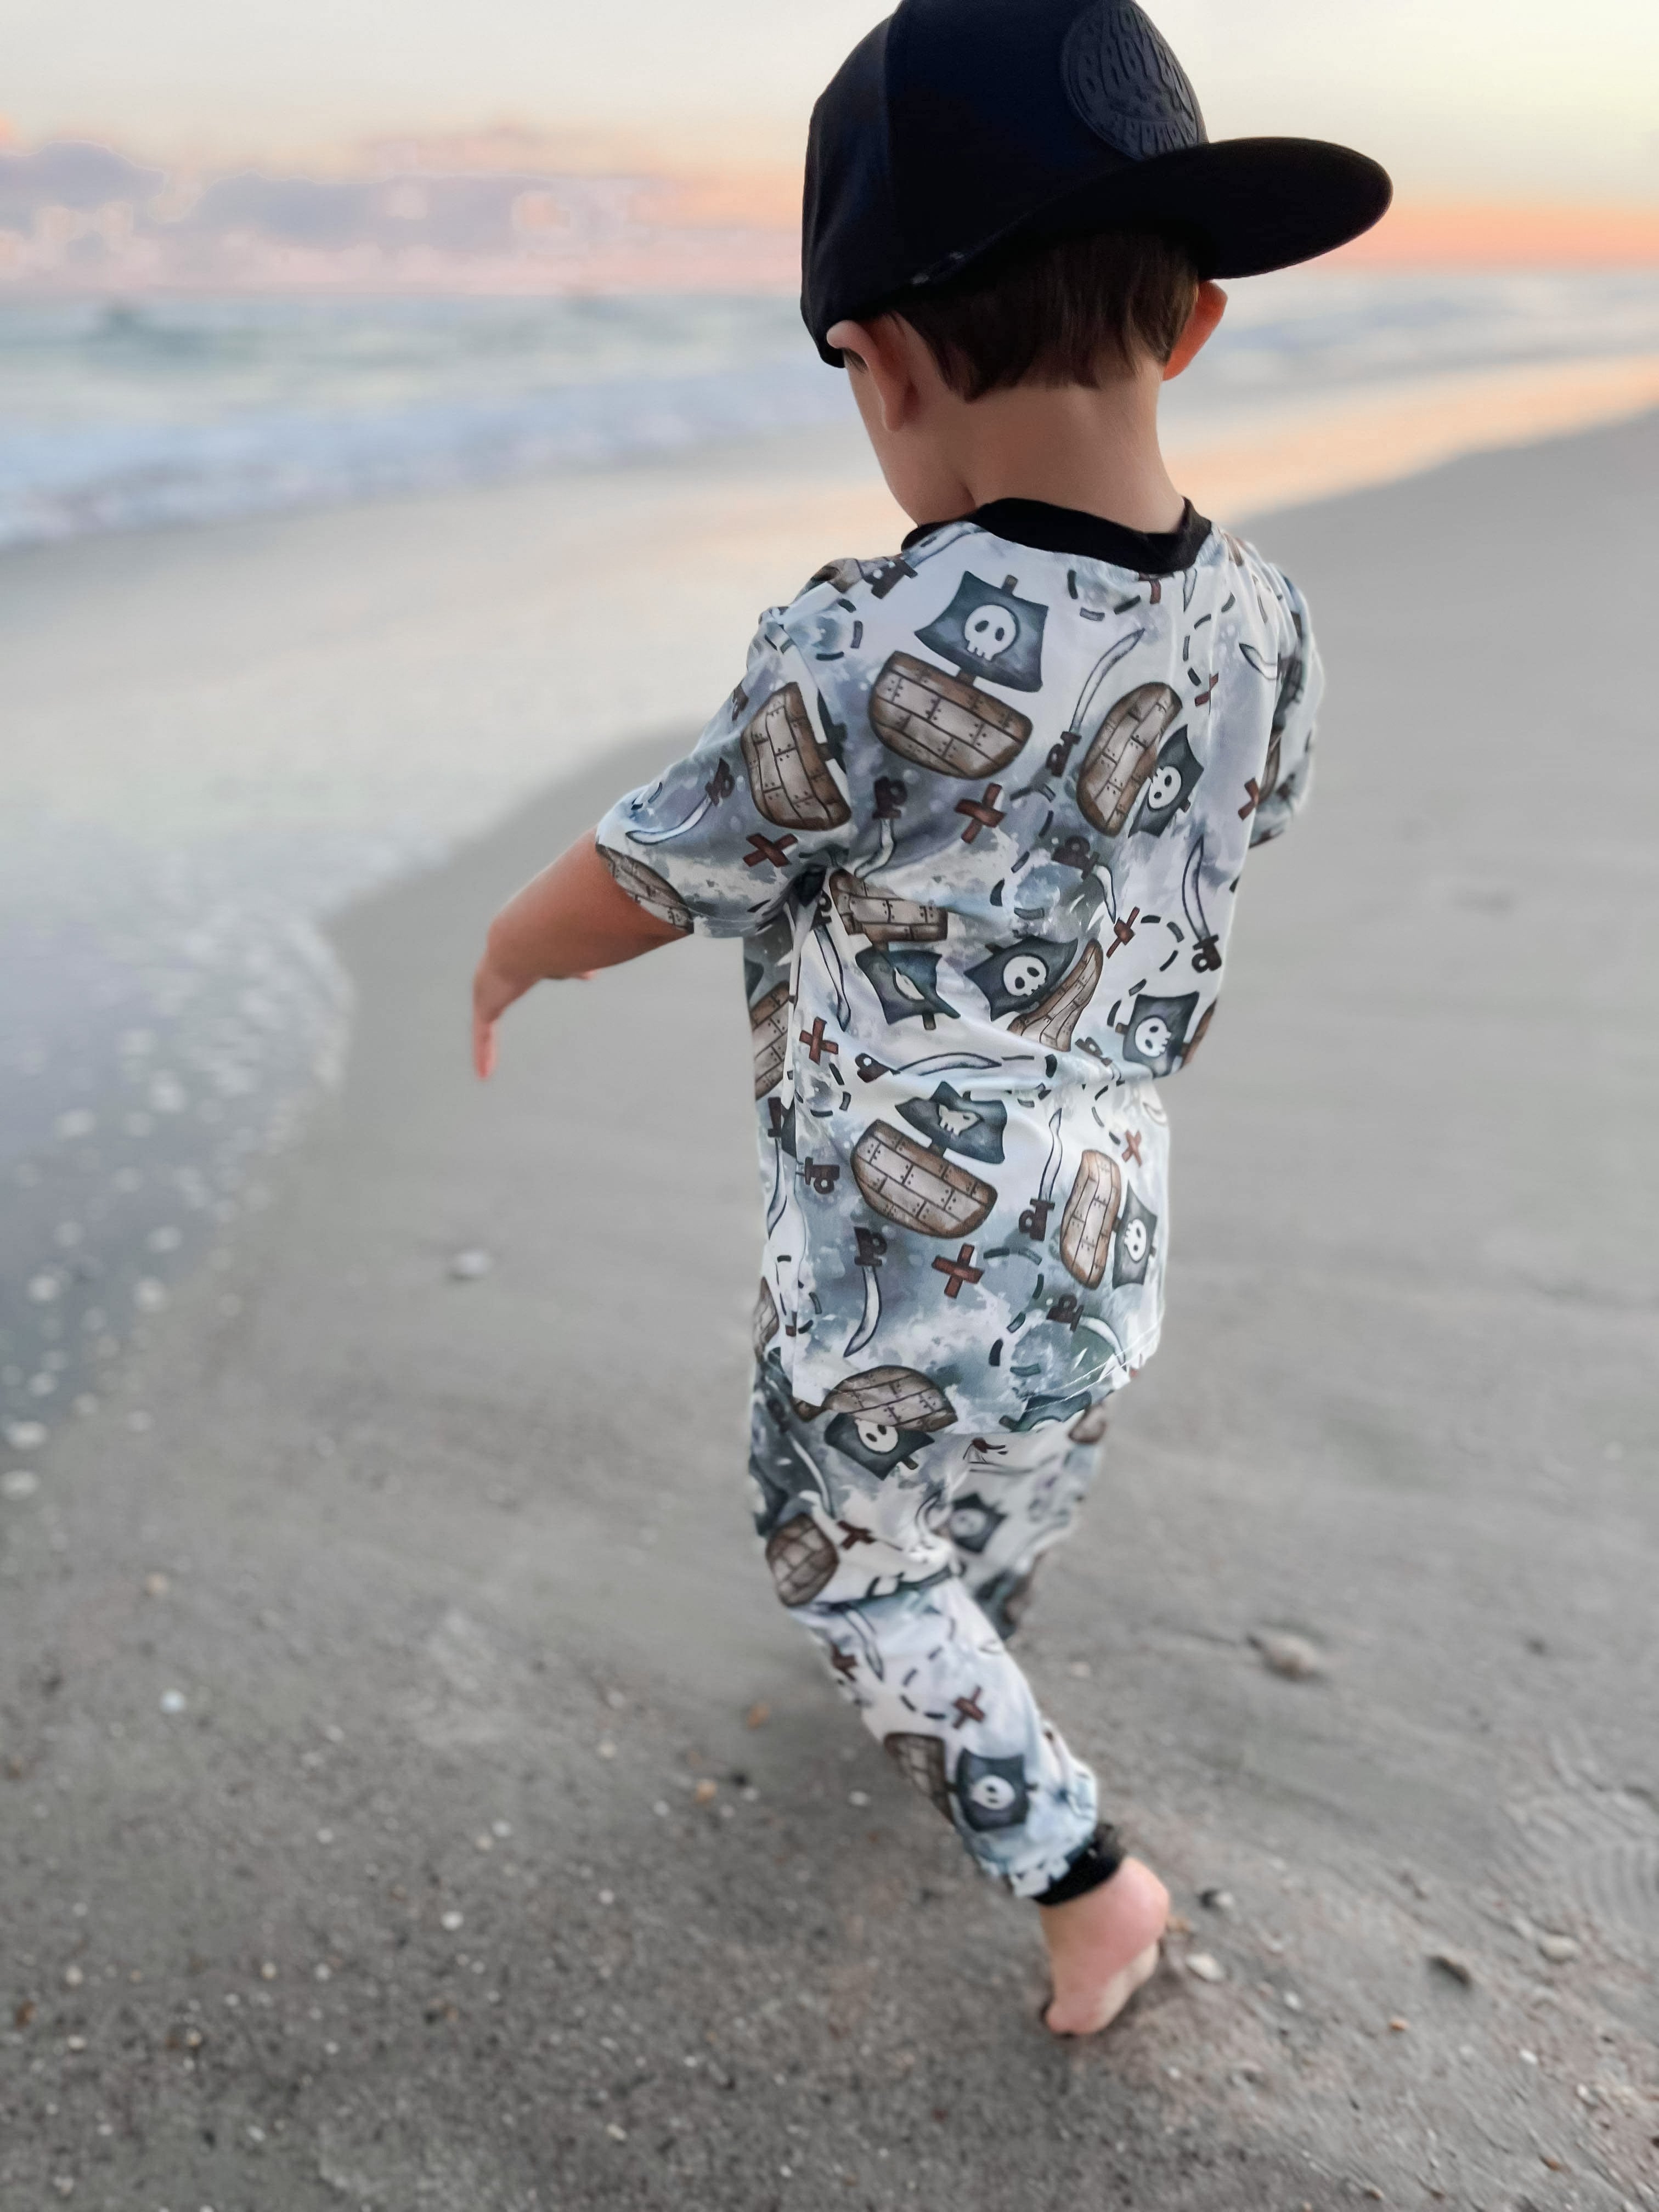 Boys 2-Piece Short Sleeve Pajamas - Pirate Ships, knives, sabers, and x marks the spot